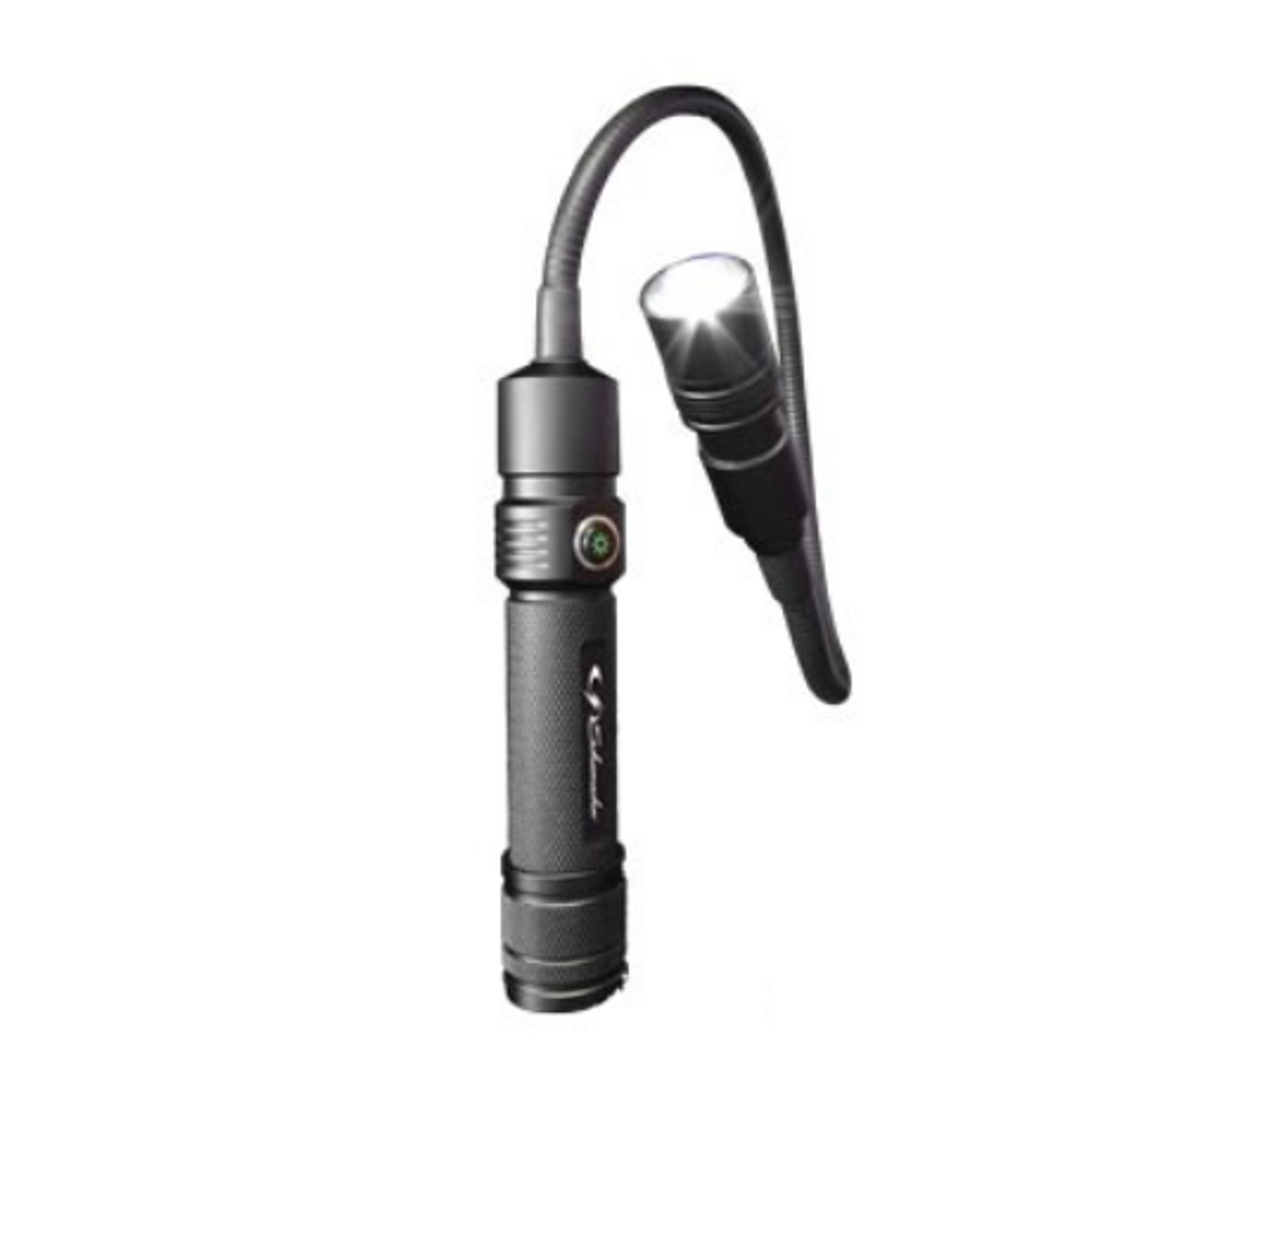 SL876U - Schumacher Rechargeable Flexible Torch. Aluminium With Magnetic Base. Adjustable Output and Beam Focus. Single Pack. RV. Ultimate LED. 250Lm on high, 125Lm on low